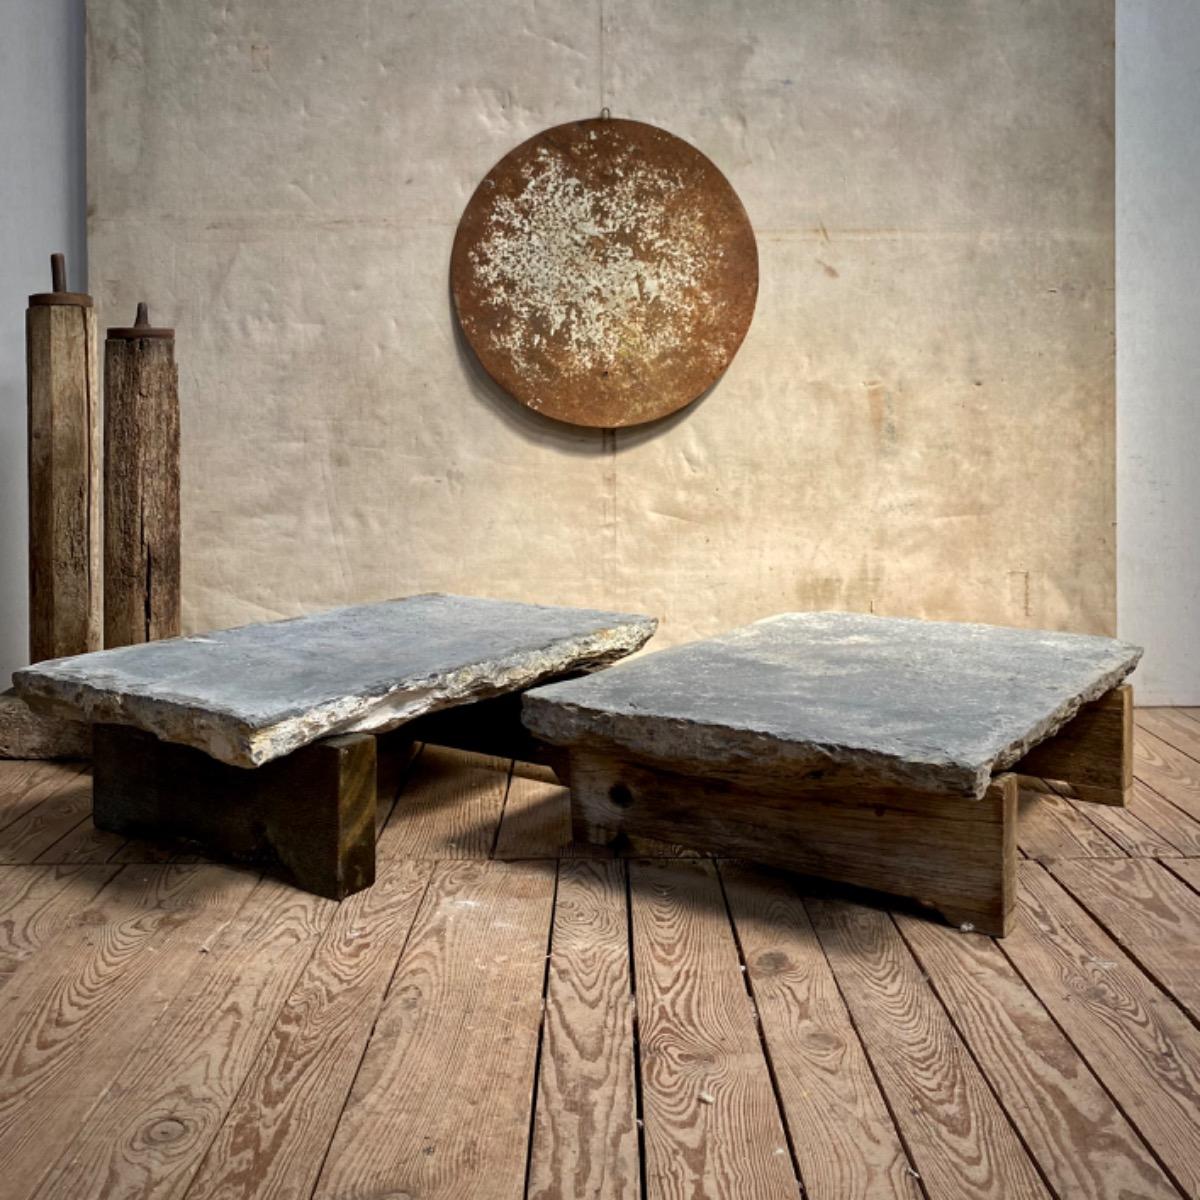 Stone & wood low tables